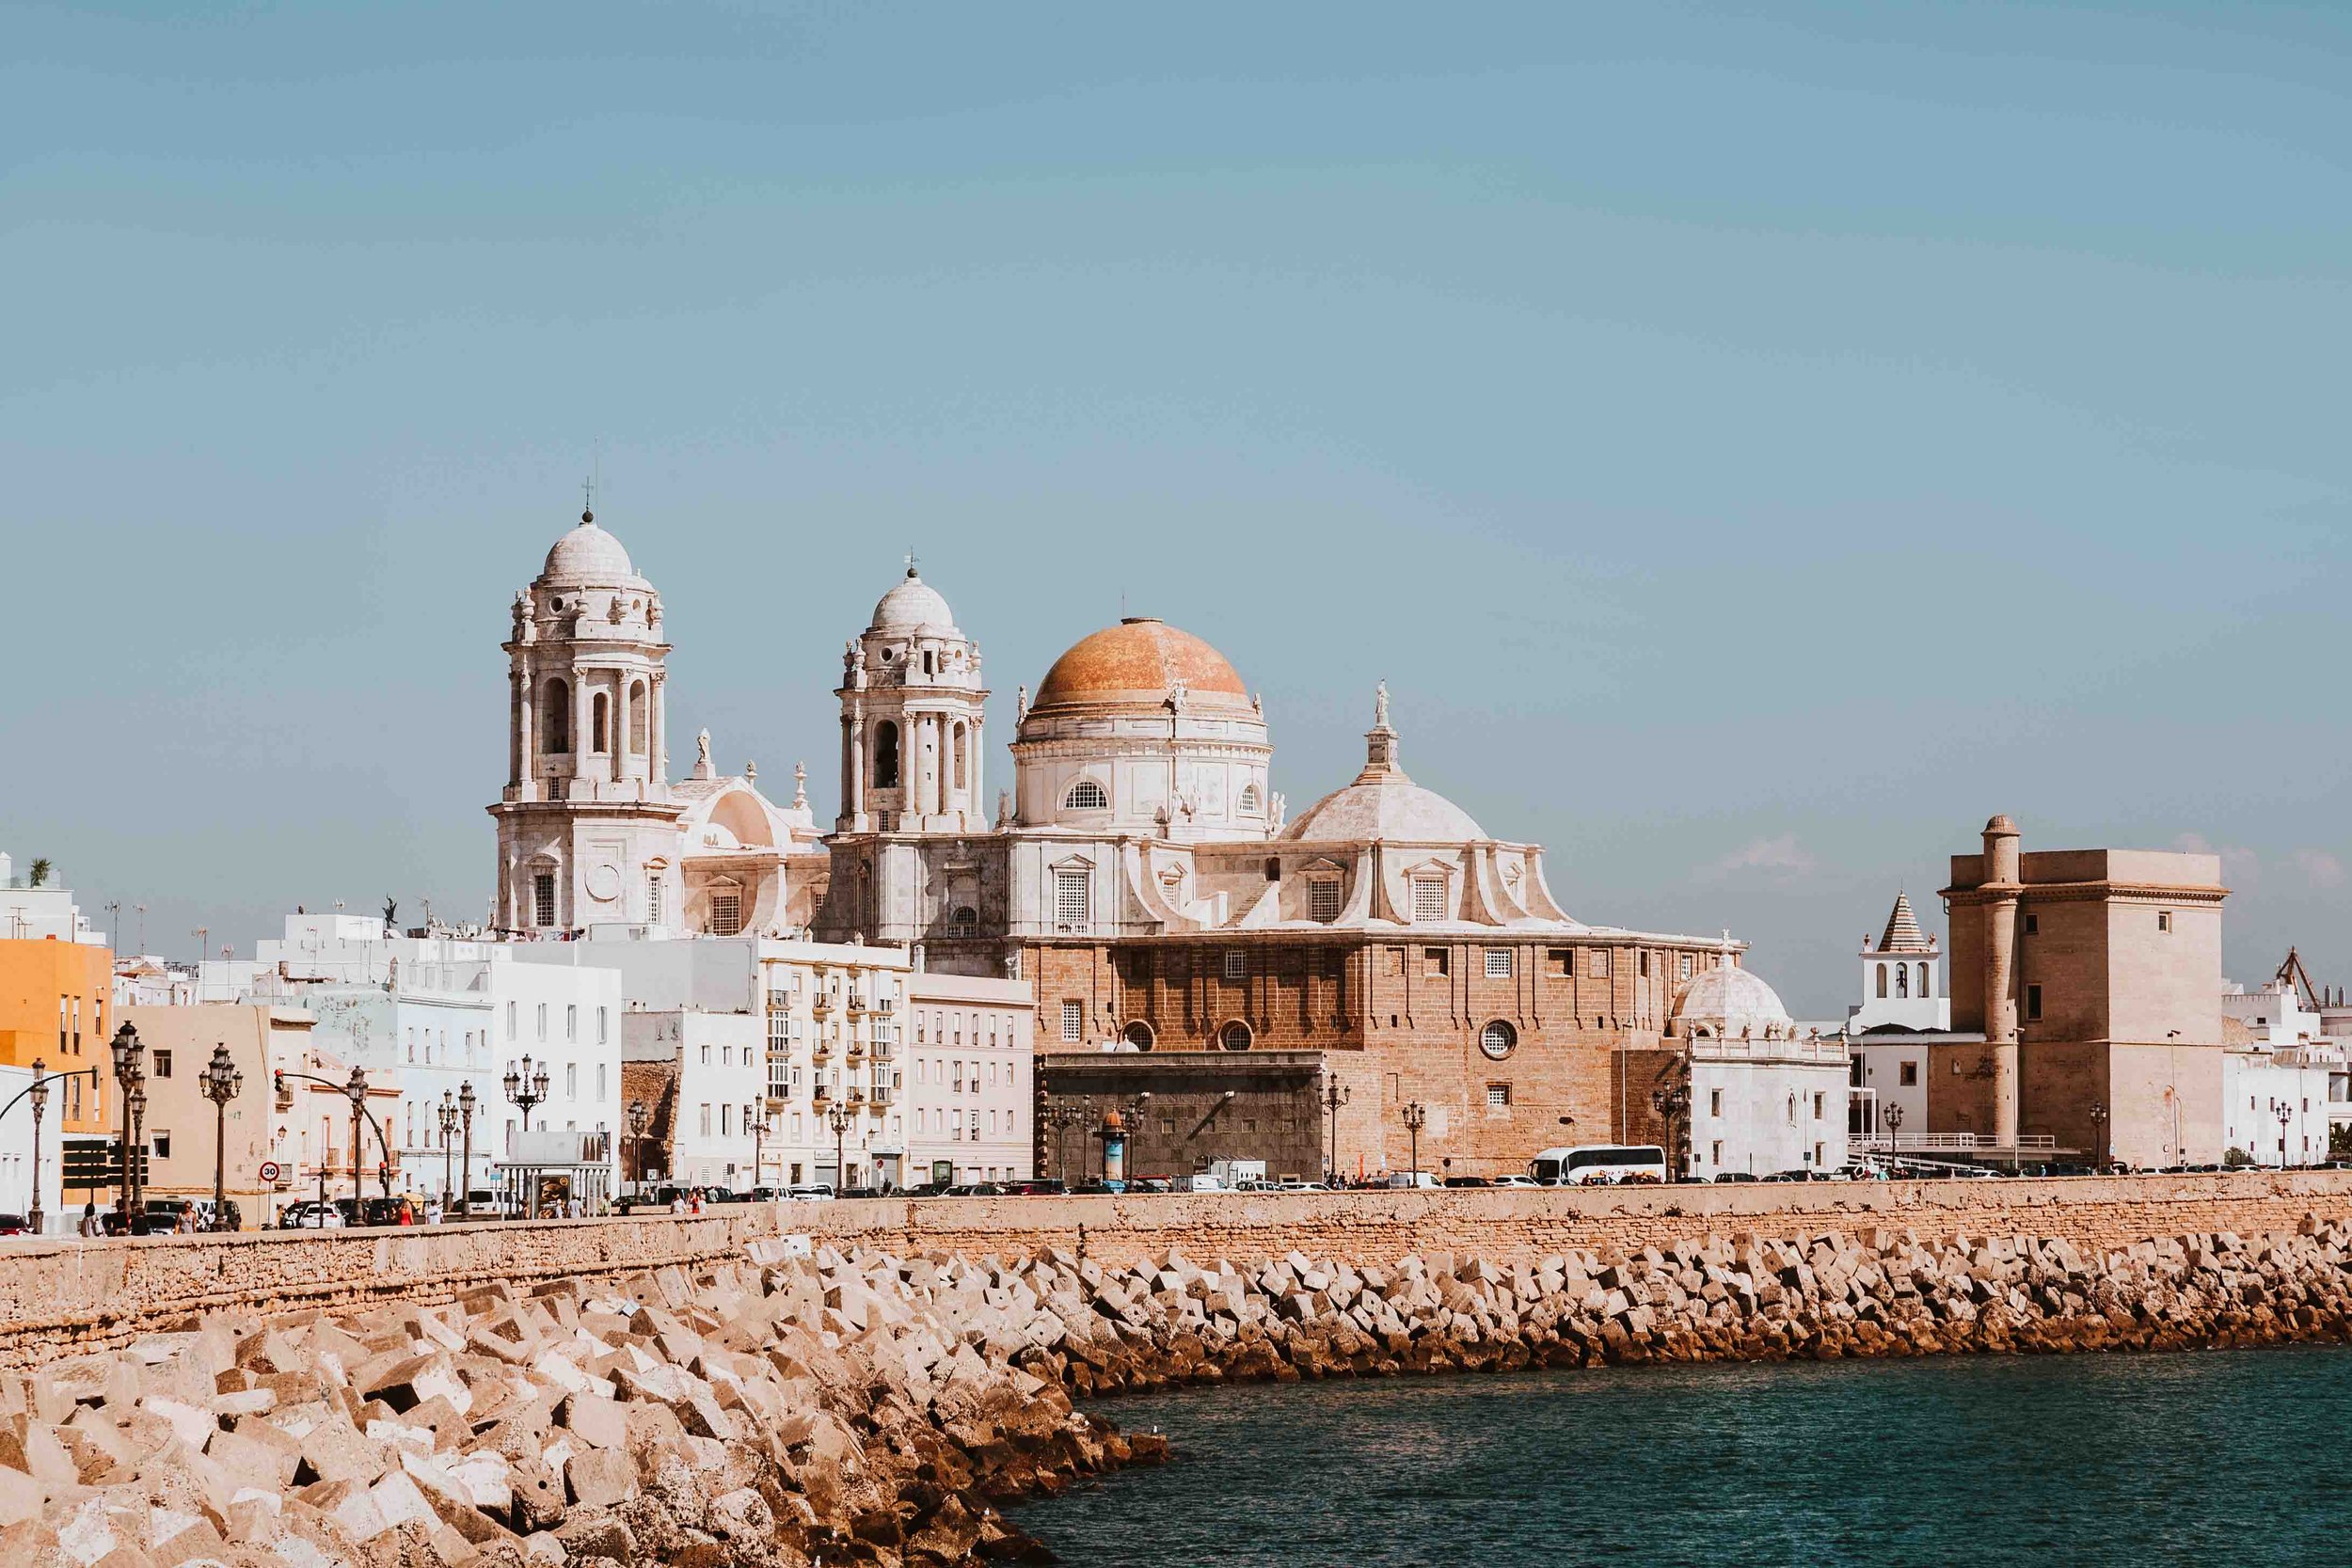 Warmest places in Europe in March - the coastline in Cadiz with historic buildings and turrets